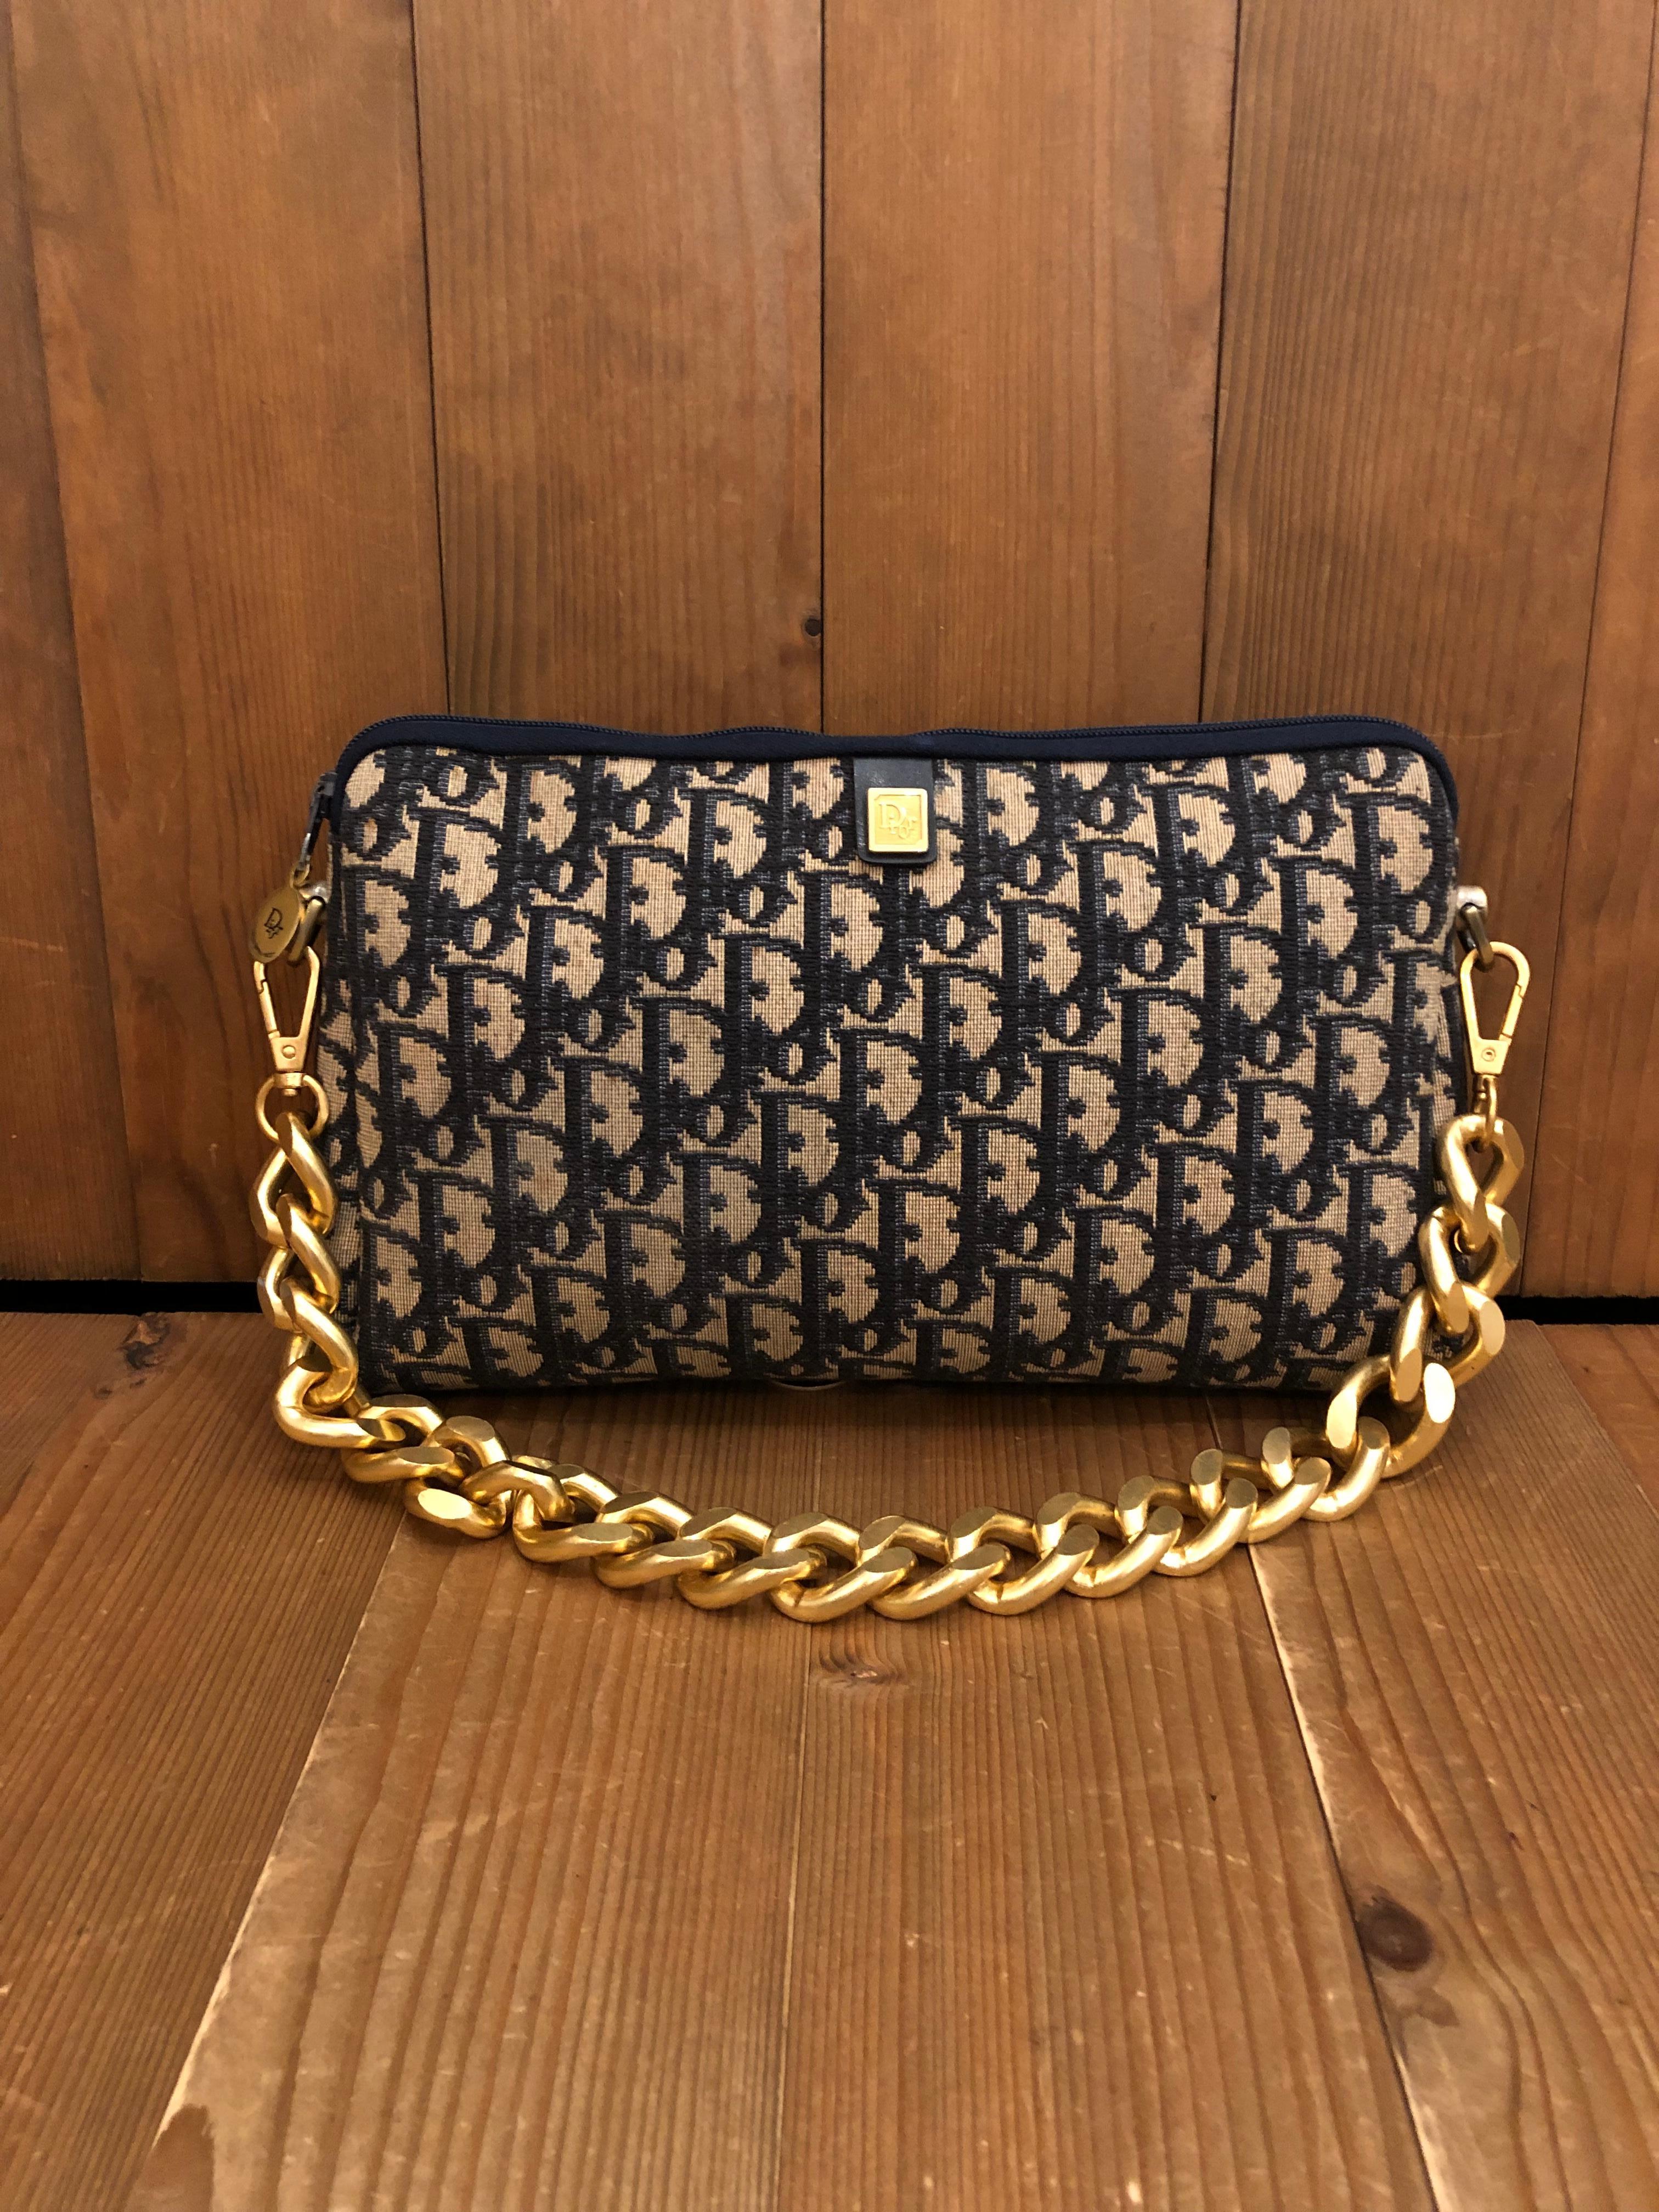 1970s CHRISTIAN DIOR Clutch Bag in navy Trotter jacquard with leather interior. Large in size. Made in France. Measures 10.25 x 6.5 x 1.75 inches. Third party non-Dior parts are added on each side to secure a gold toned chain. 

Condition: Some